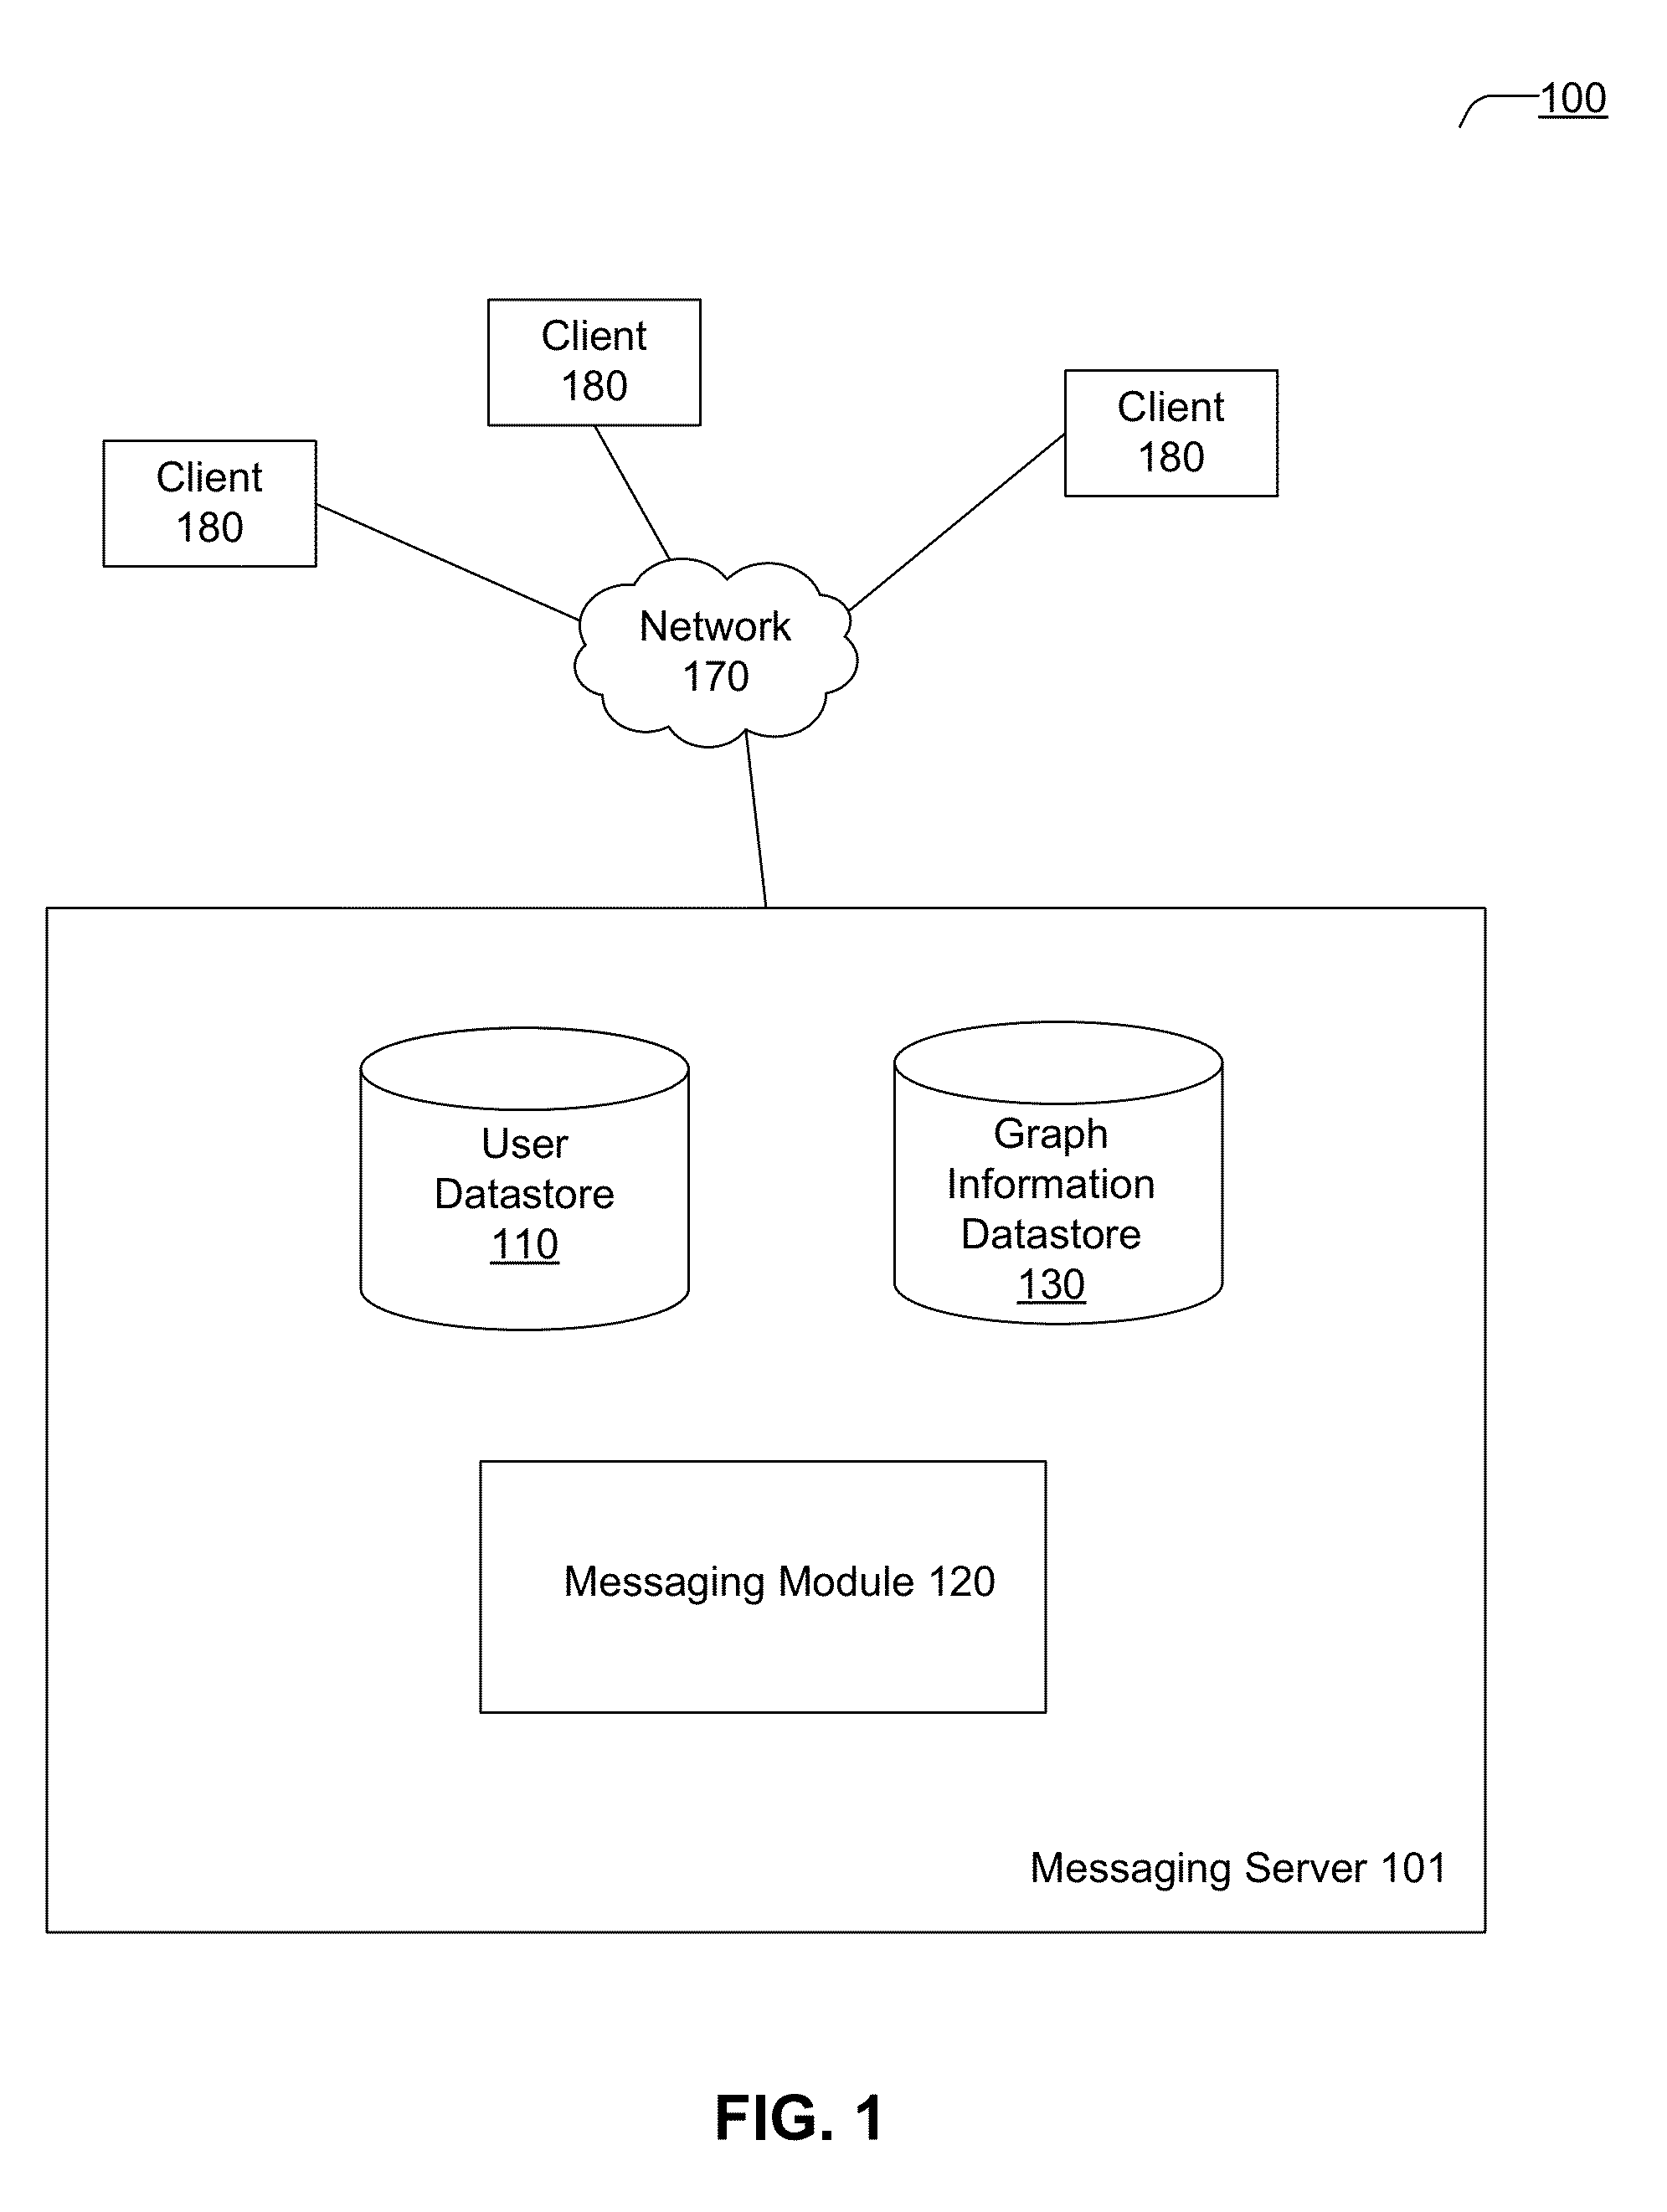 Rescinding messages in a messaging system with multiple messaging channels